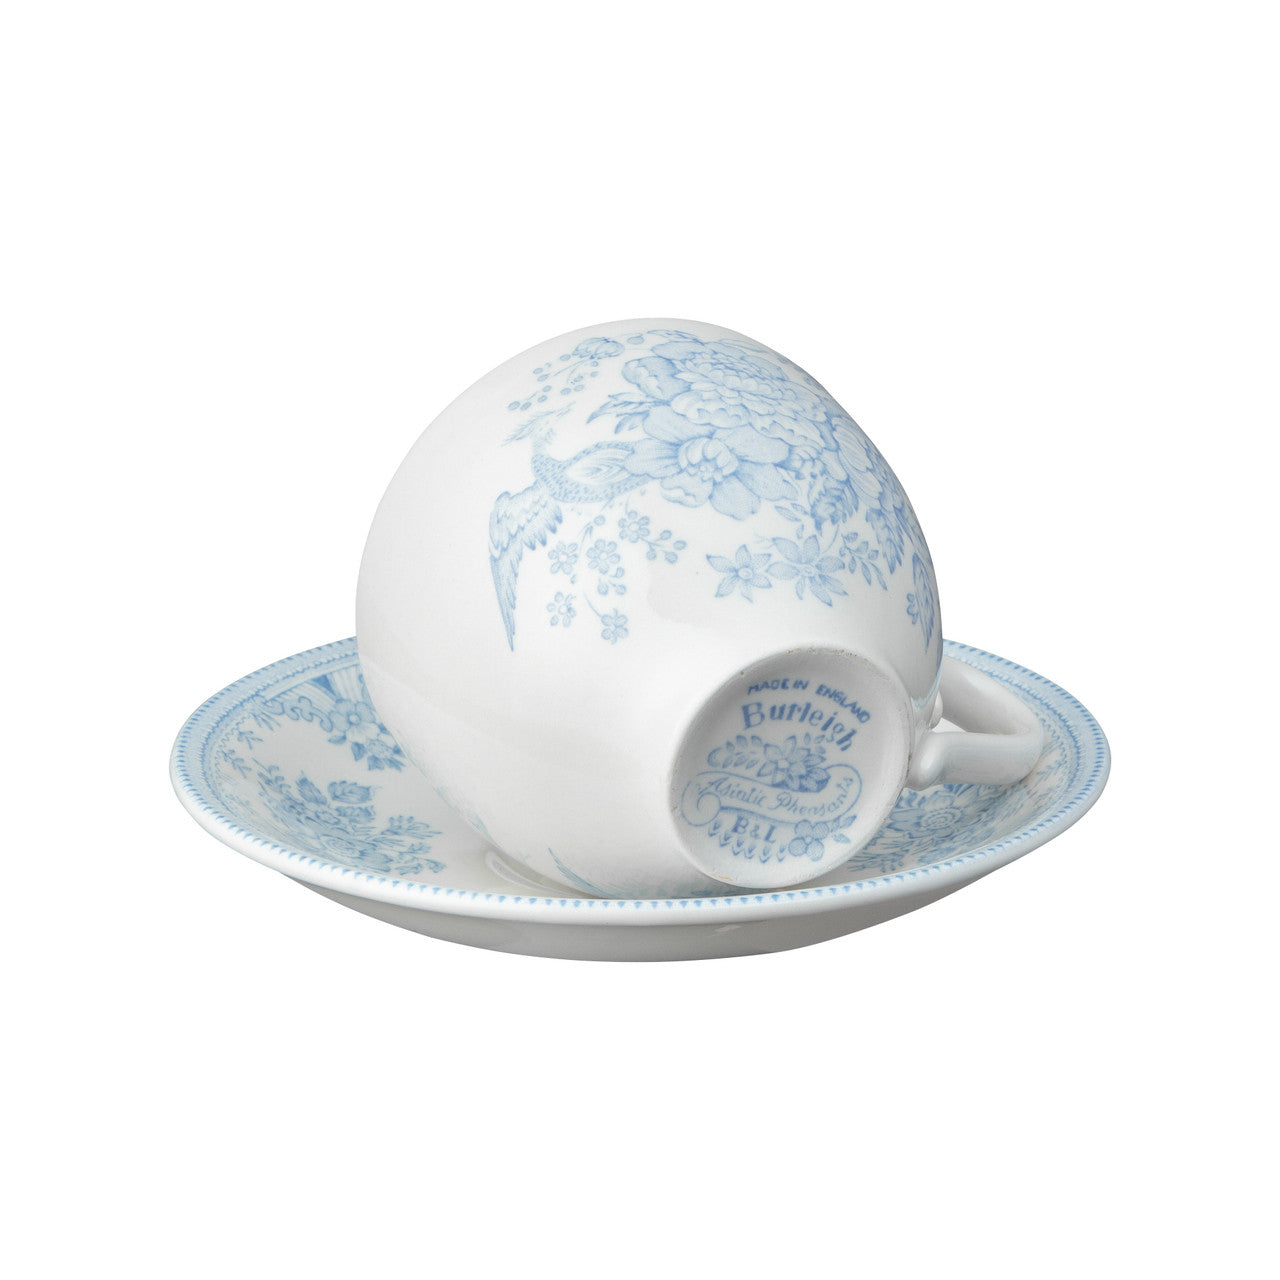 Blue Asiatic Pheasant Teacup and Saucer